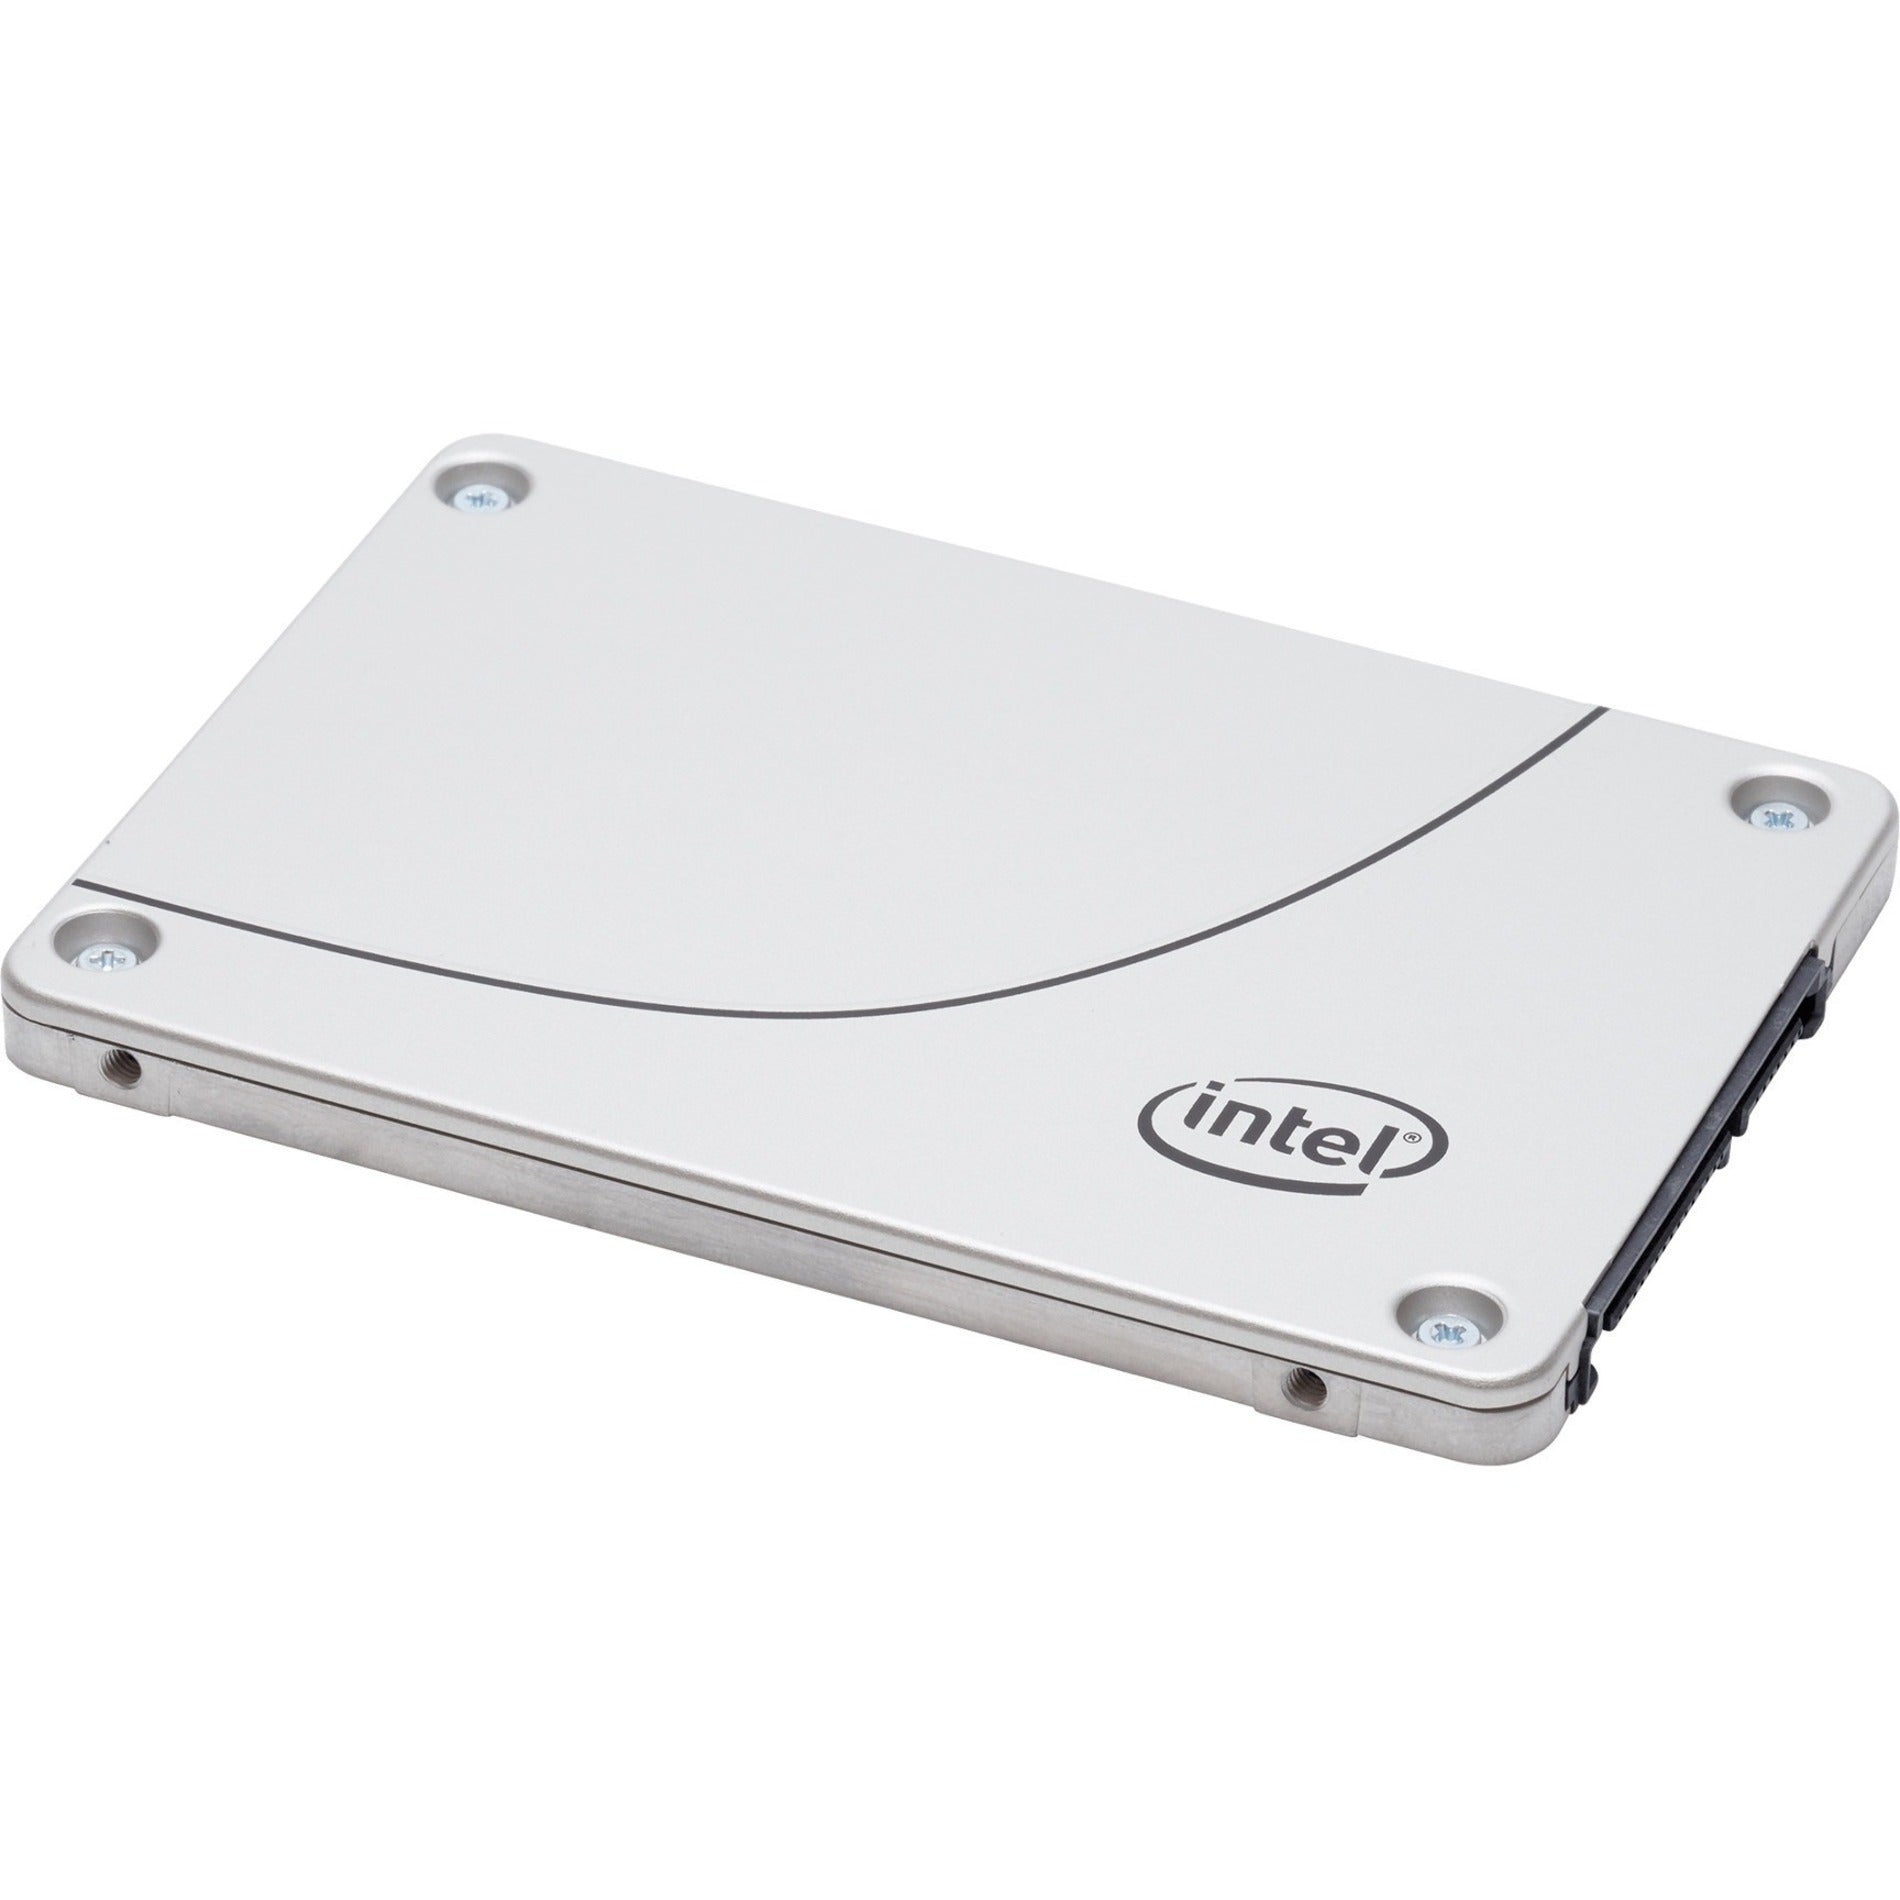 Intel SSD SSDSC2KB480G801 D3-S4510 Series 480GB 2.5" SATA 6Gb/s 3D2 TLC Single Pack, High Performance Solid State Drive